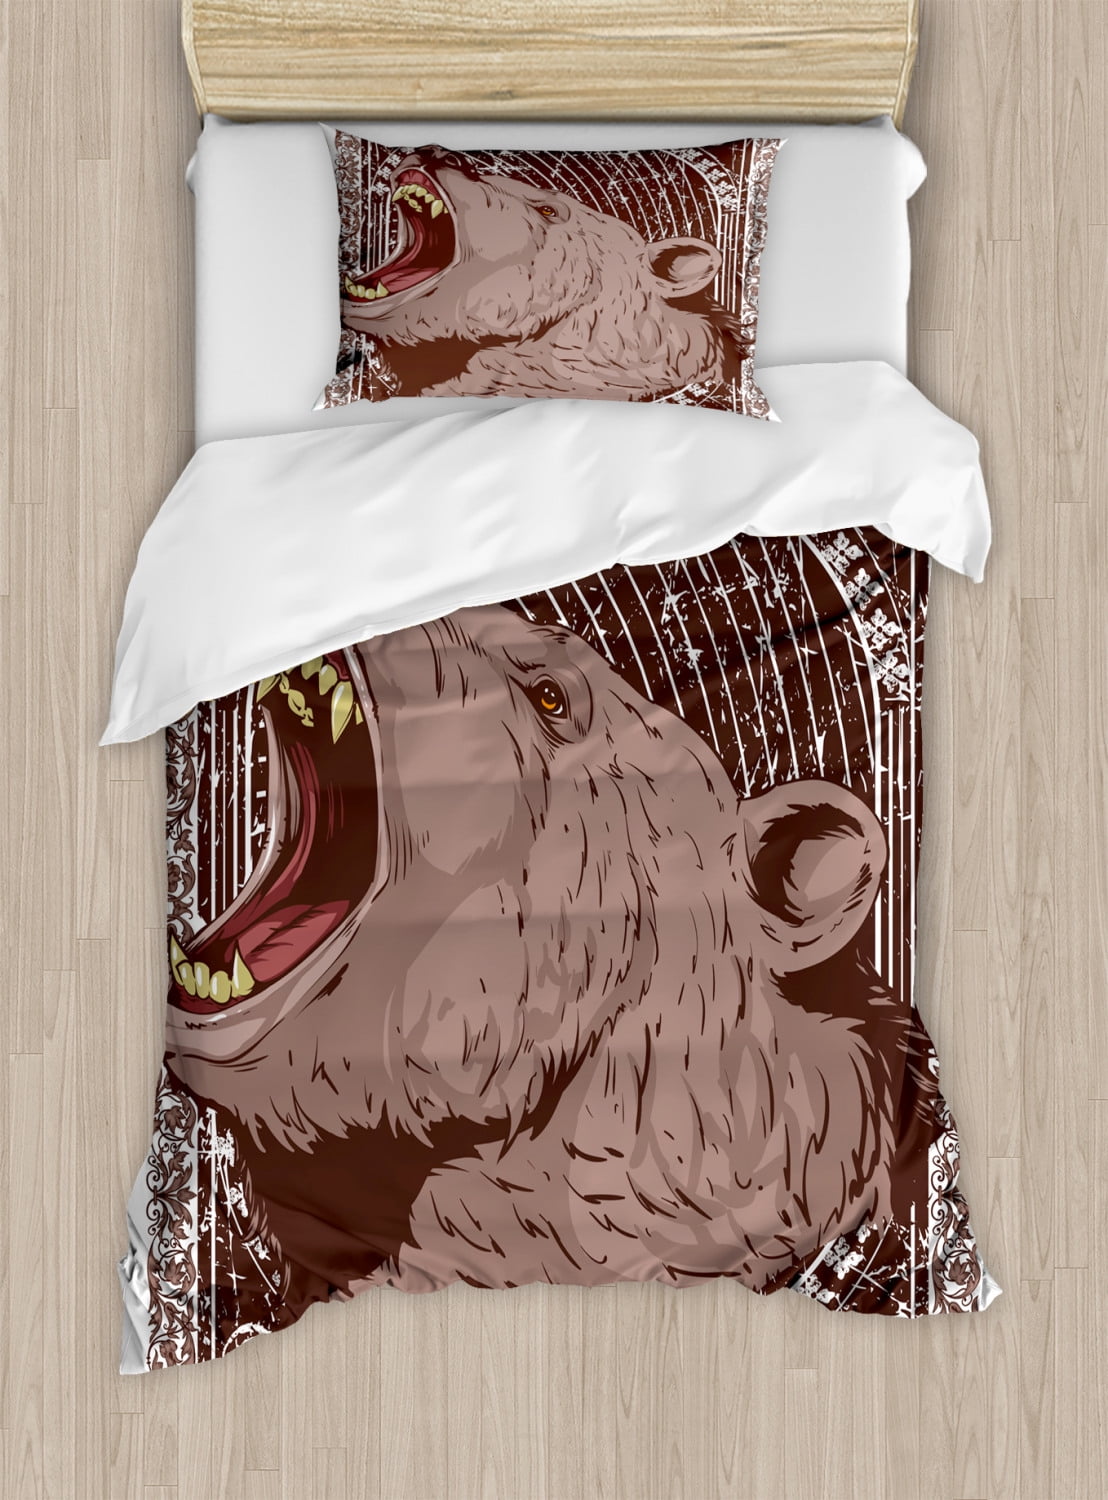 Animal Print Duvet Cover Set Illustration Of The Growling Grizzly